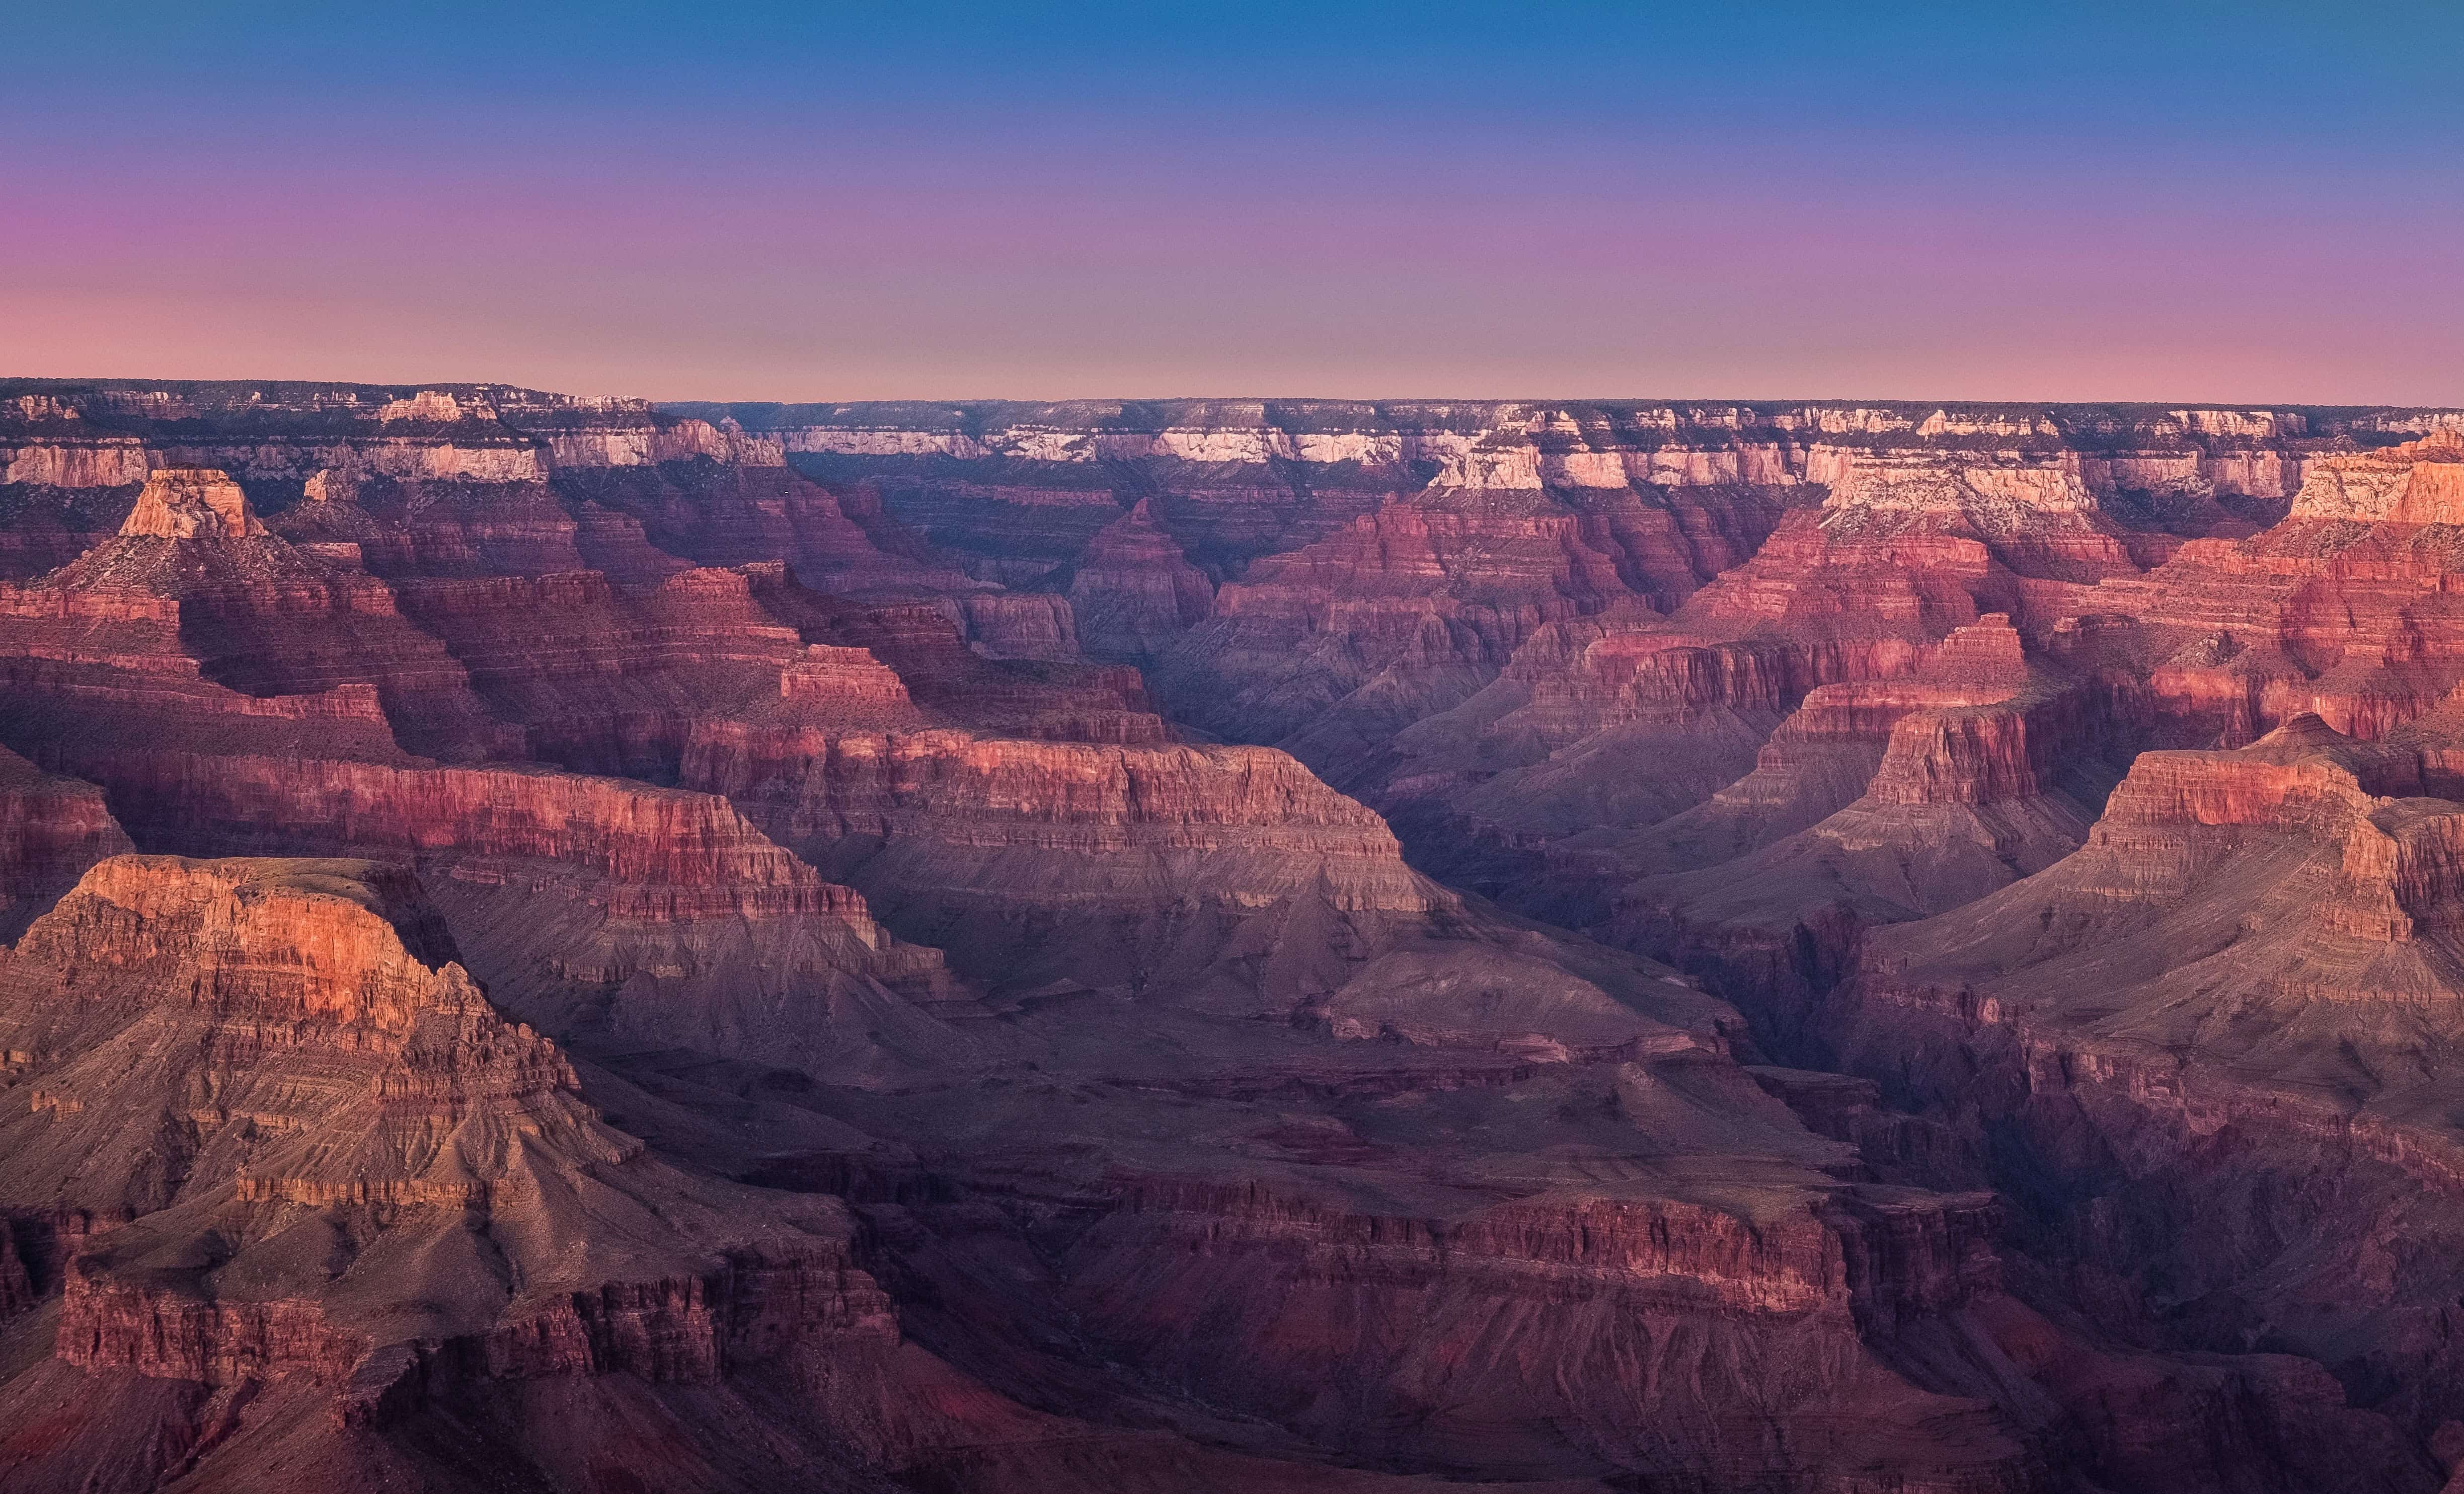 An insider’s guide to the Grand Canyon